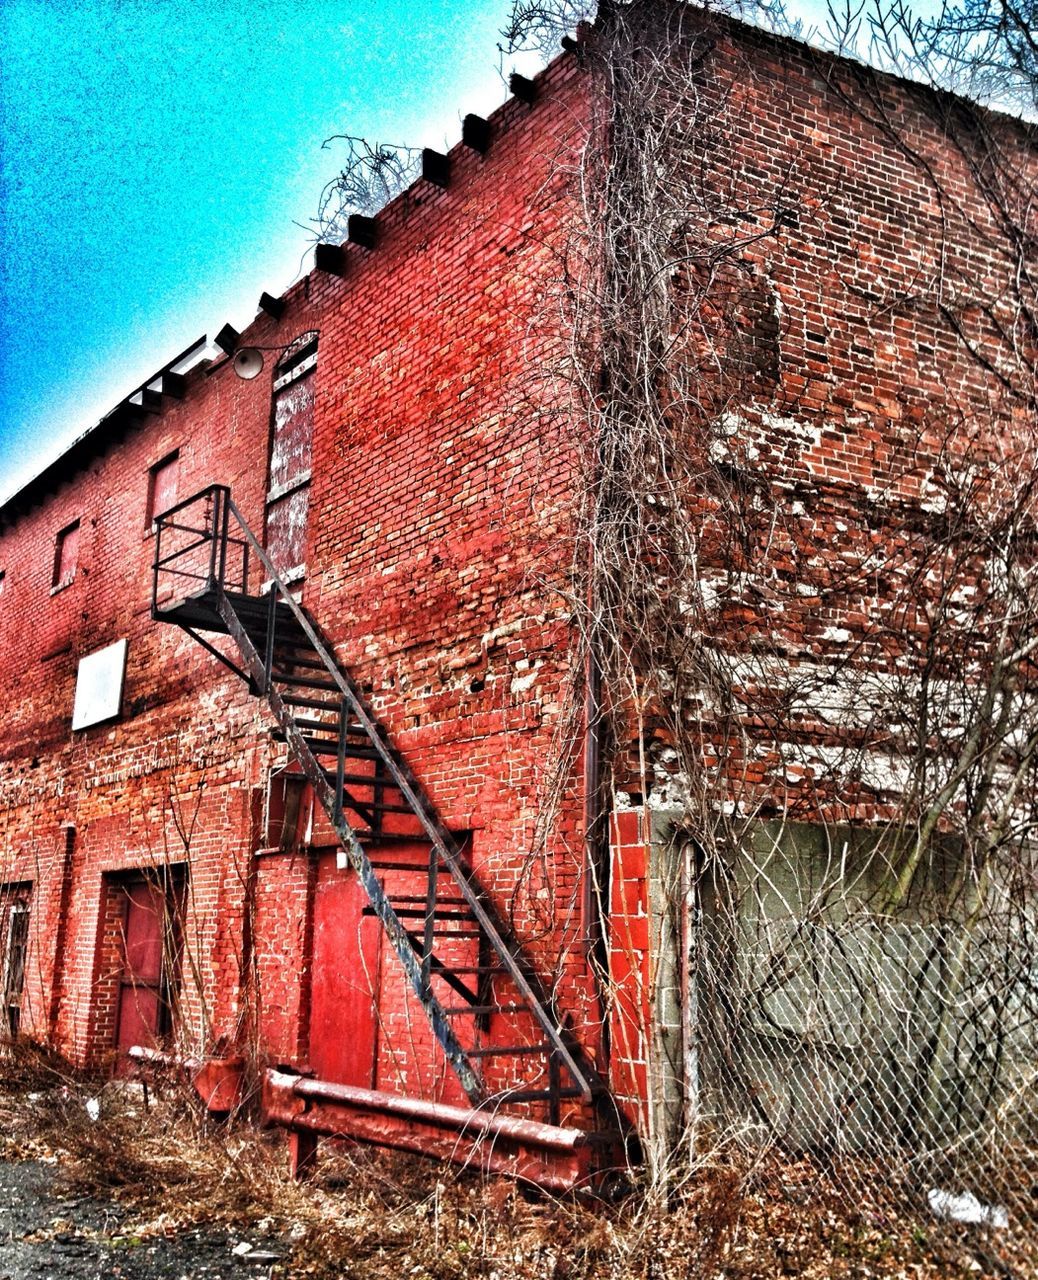 architecture, built structure, building exterior, house, old, brick wall, weathered, abandoned, wall - building feature, damaged, residential structure, deterioration, run-down, obsolete, window, wall, bad condition, day, outdoors, building